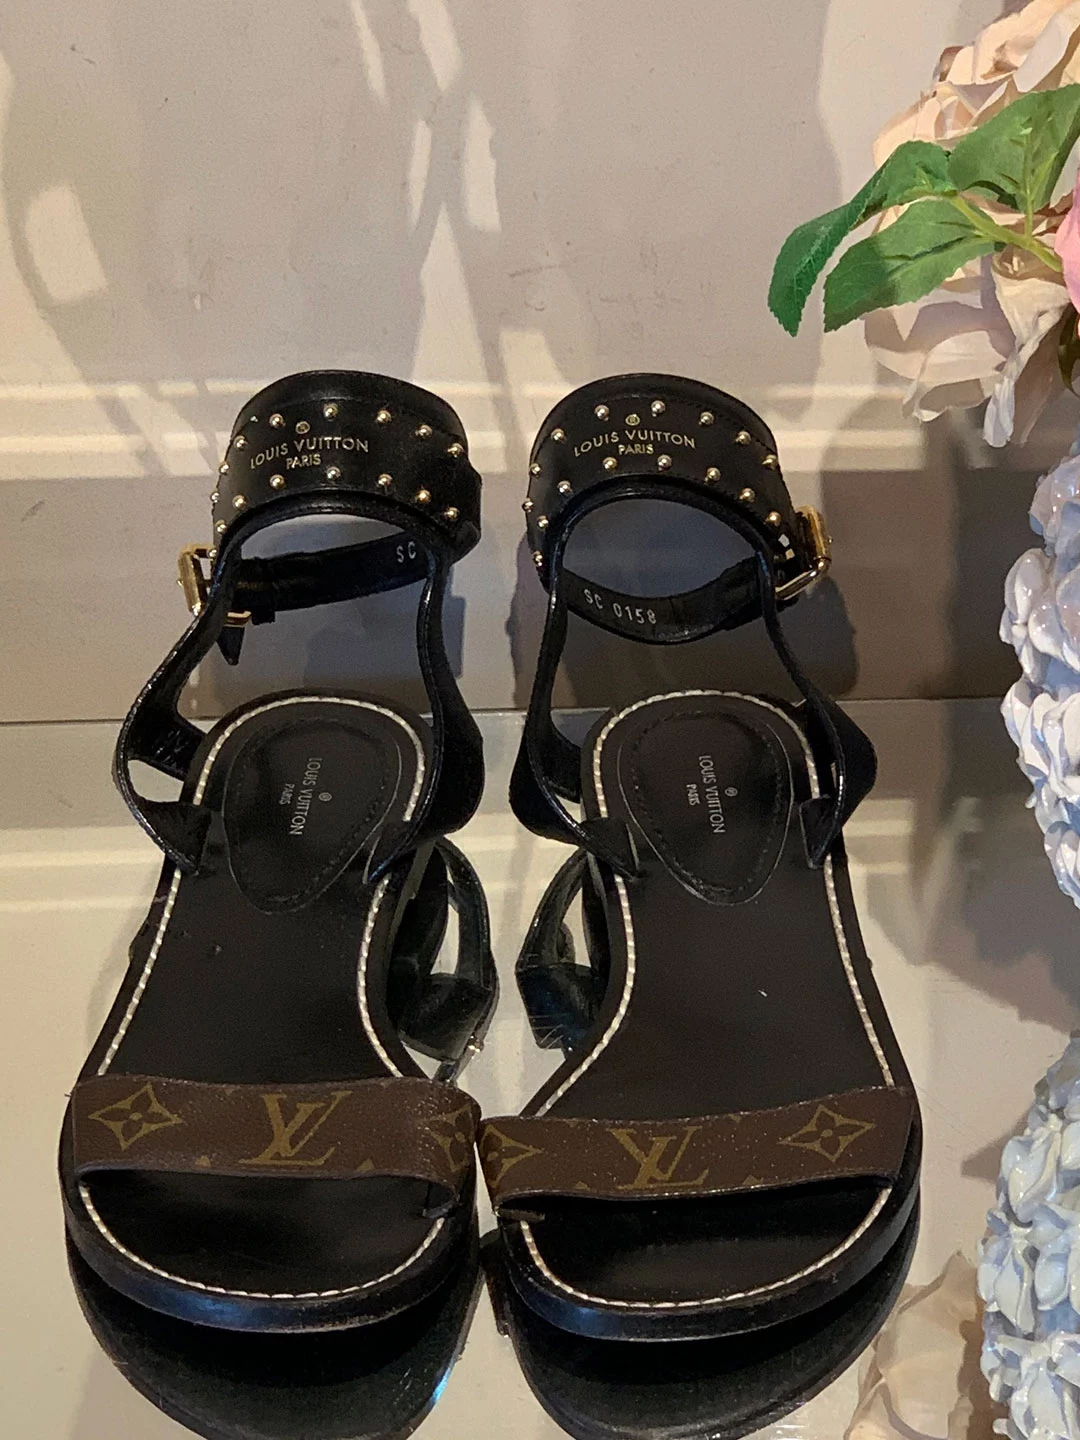 Louis Vuitton Nomad Sandals from